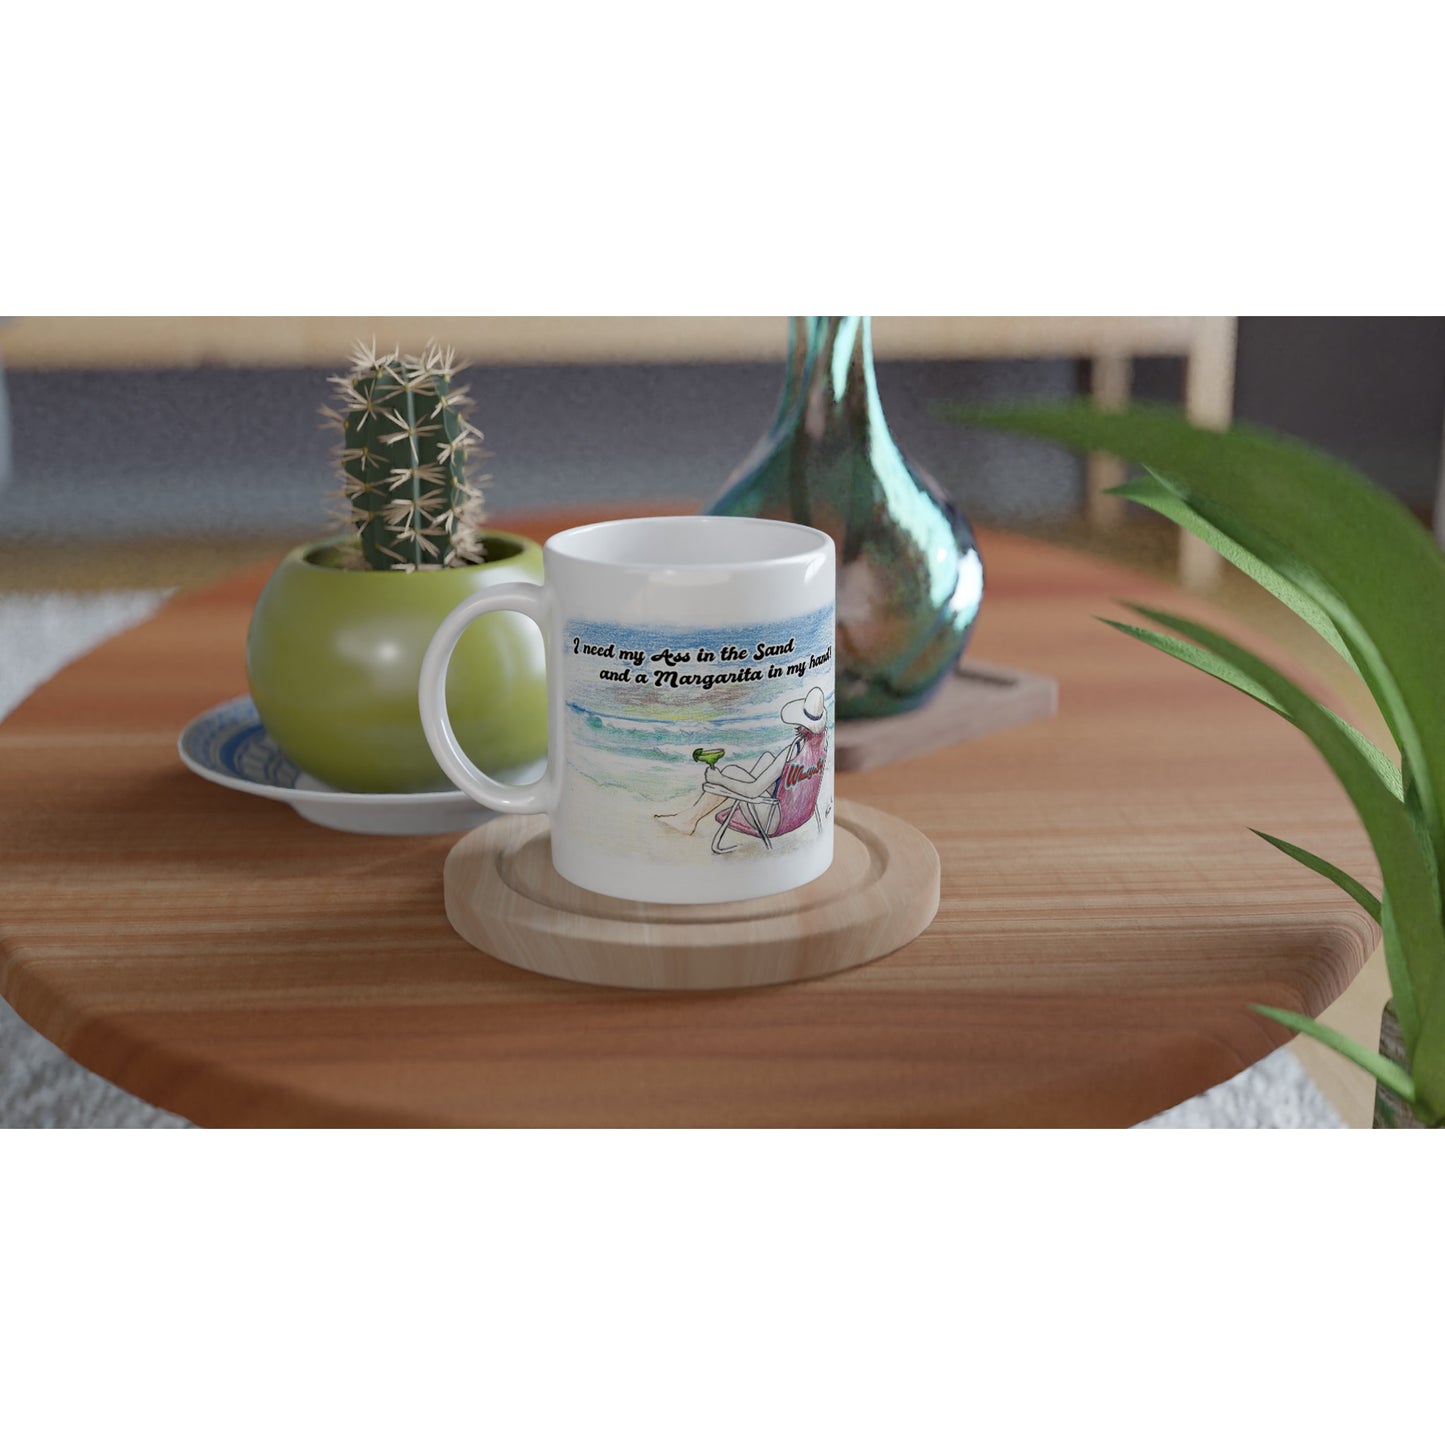 A white ceramic 11oz mug with motto I need my Ass in the Sand and a Margarita in my hand on front and WhatYa Say logo on back dishwasher and microwave safe from WhatYa Say Apparel sitting on coaster with green potted cactus and silver vase. 